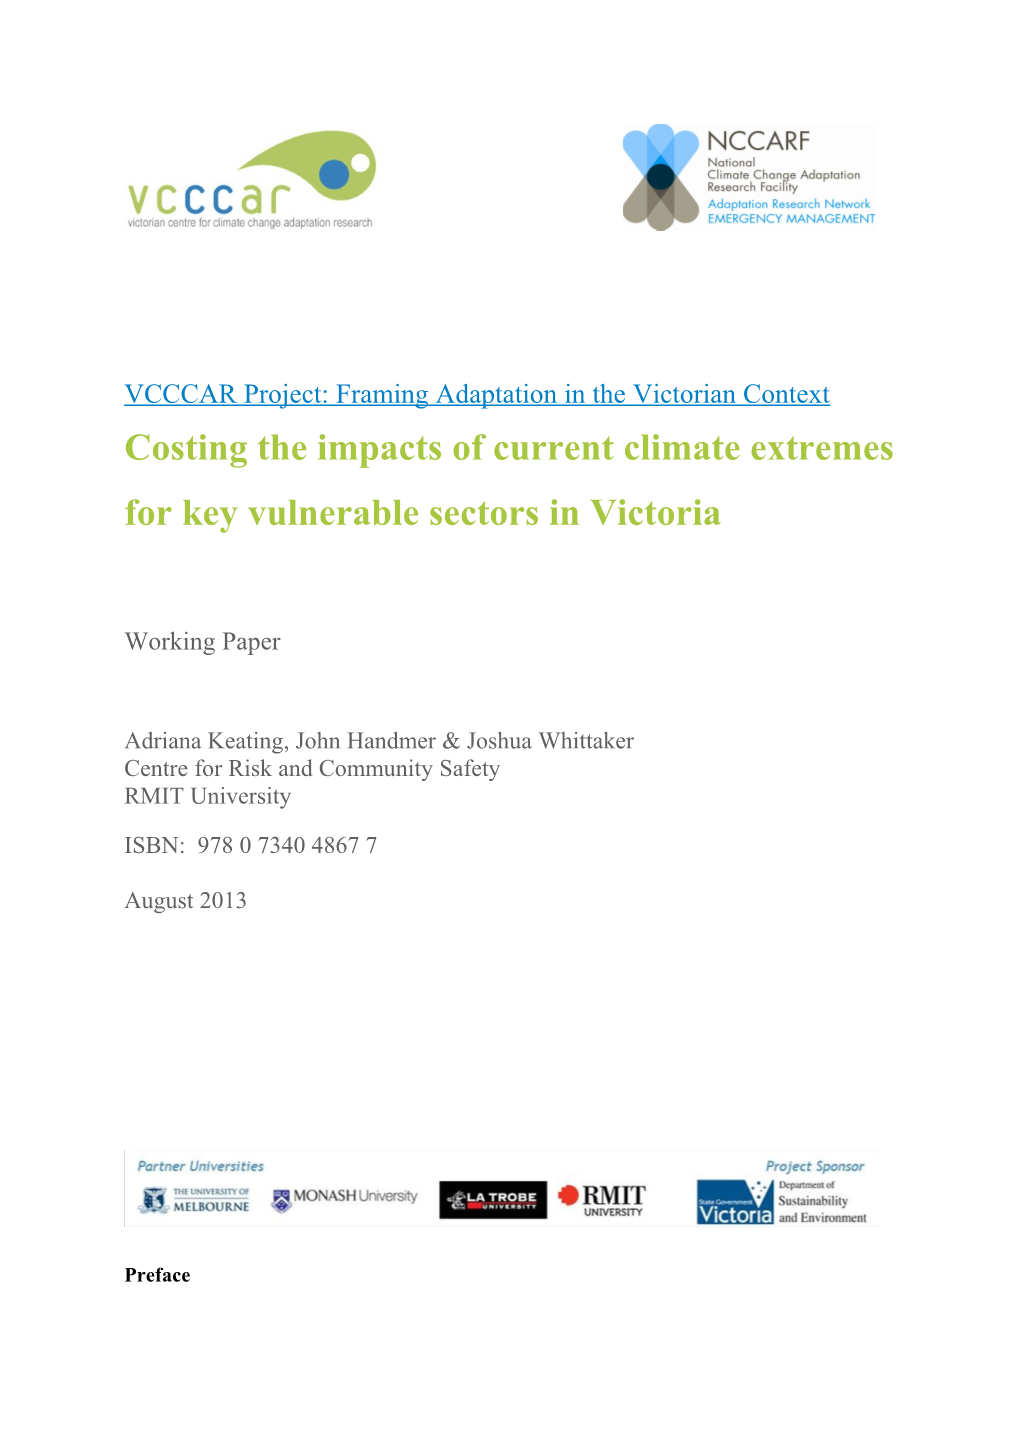 VCCCAR Project: Framing Adaptation in the Victorian Context